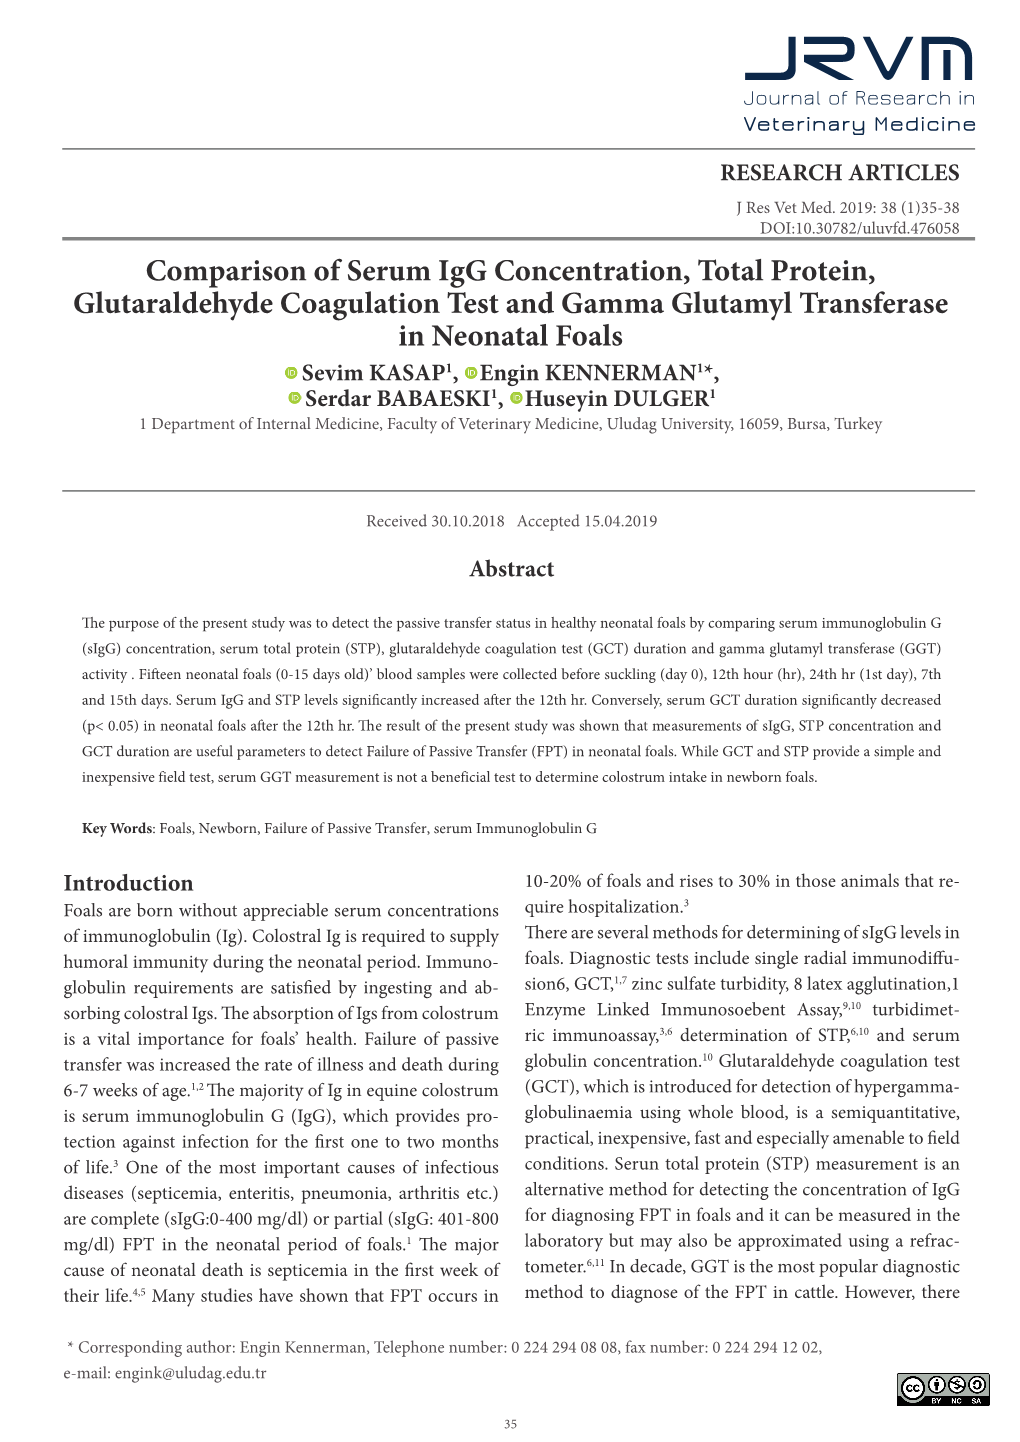 Comparison of Serum Igg Concentration, Total Protein